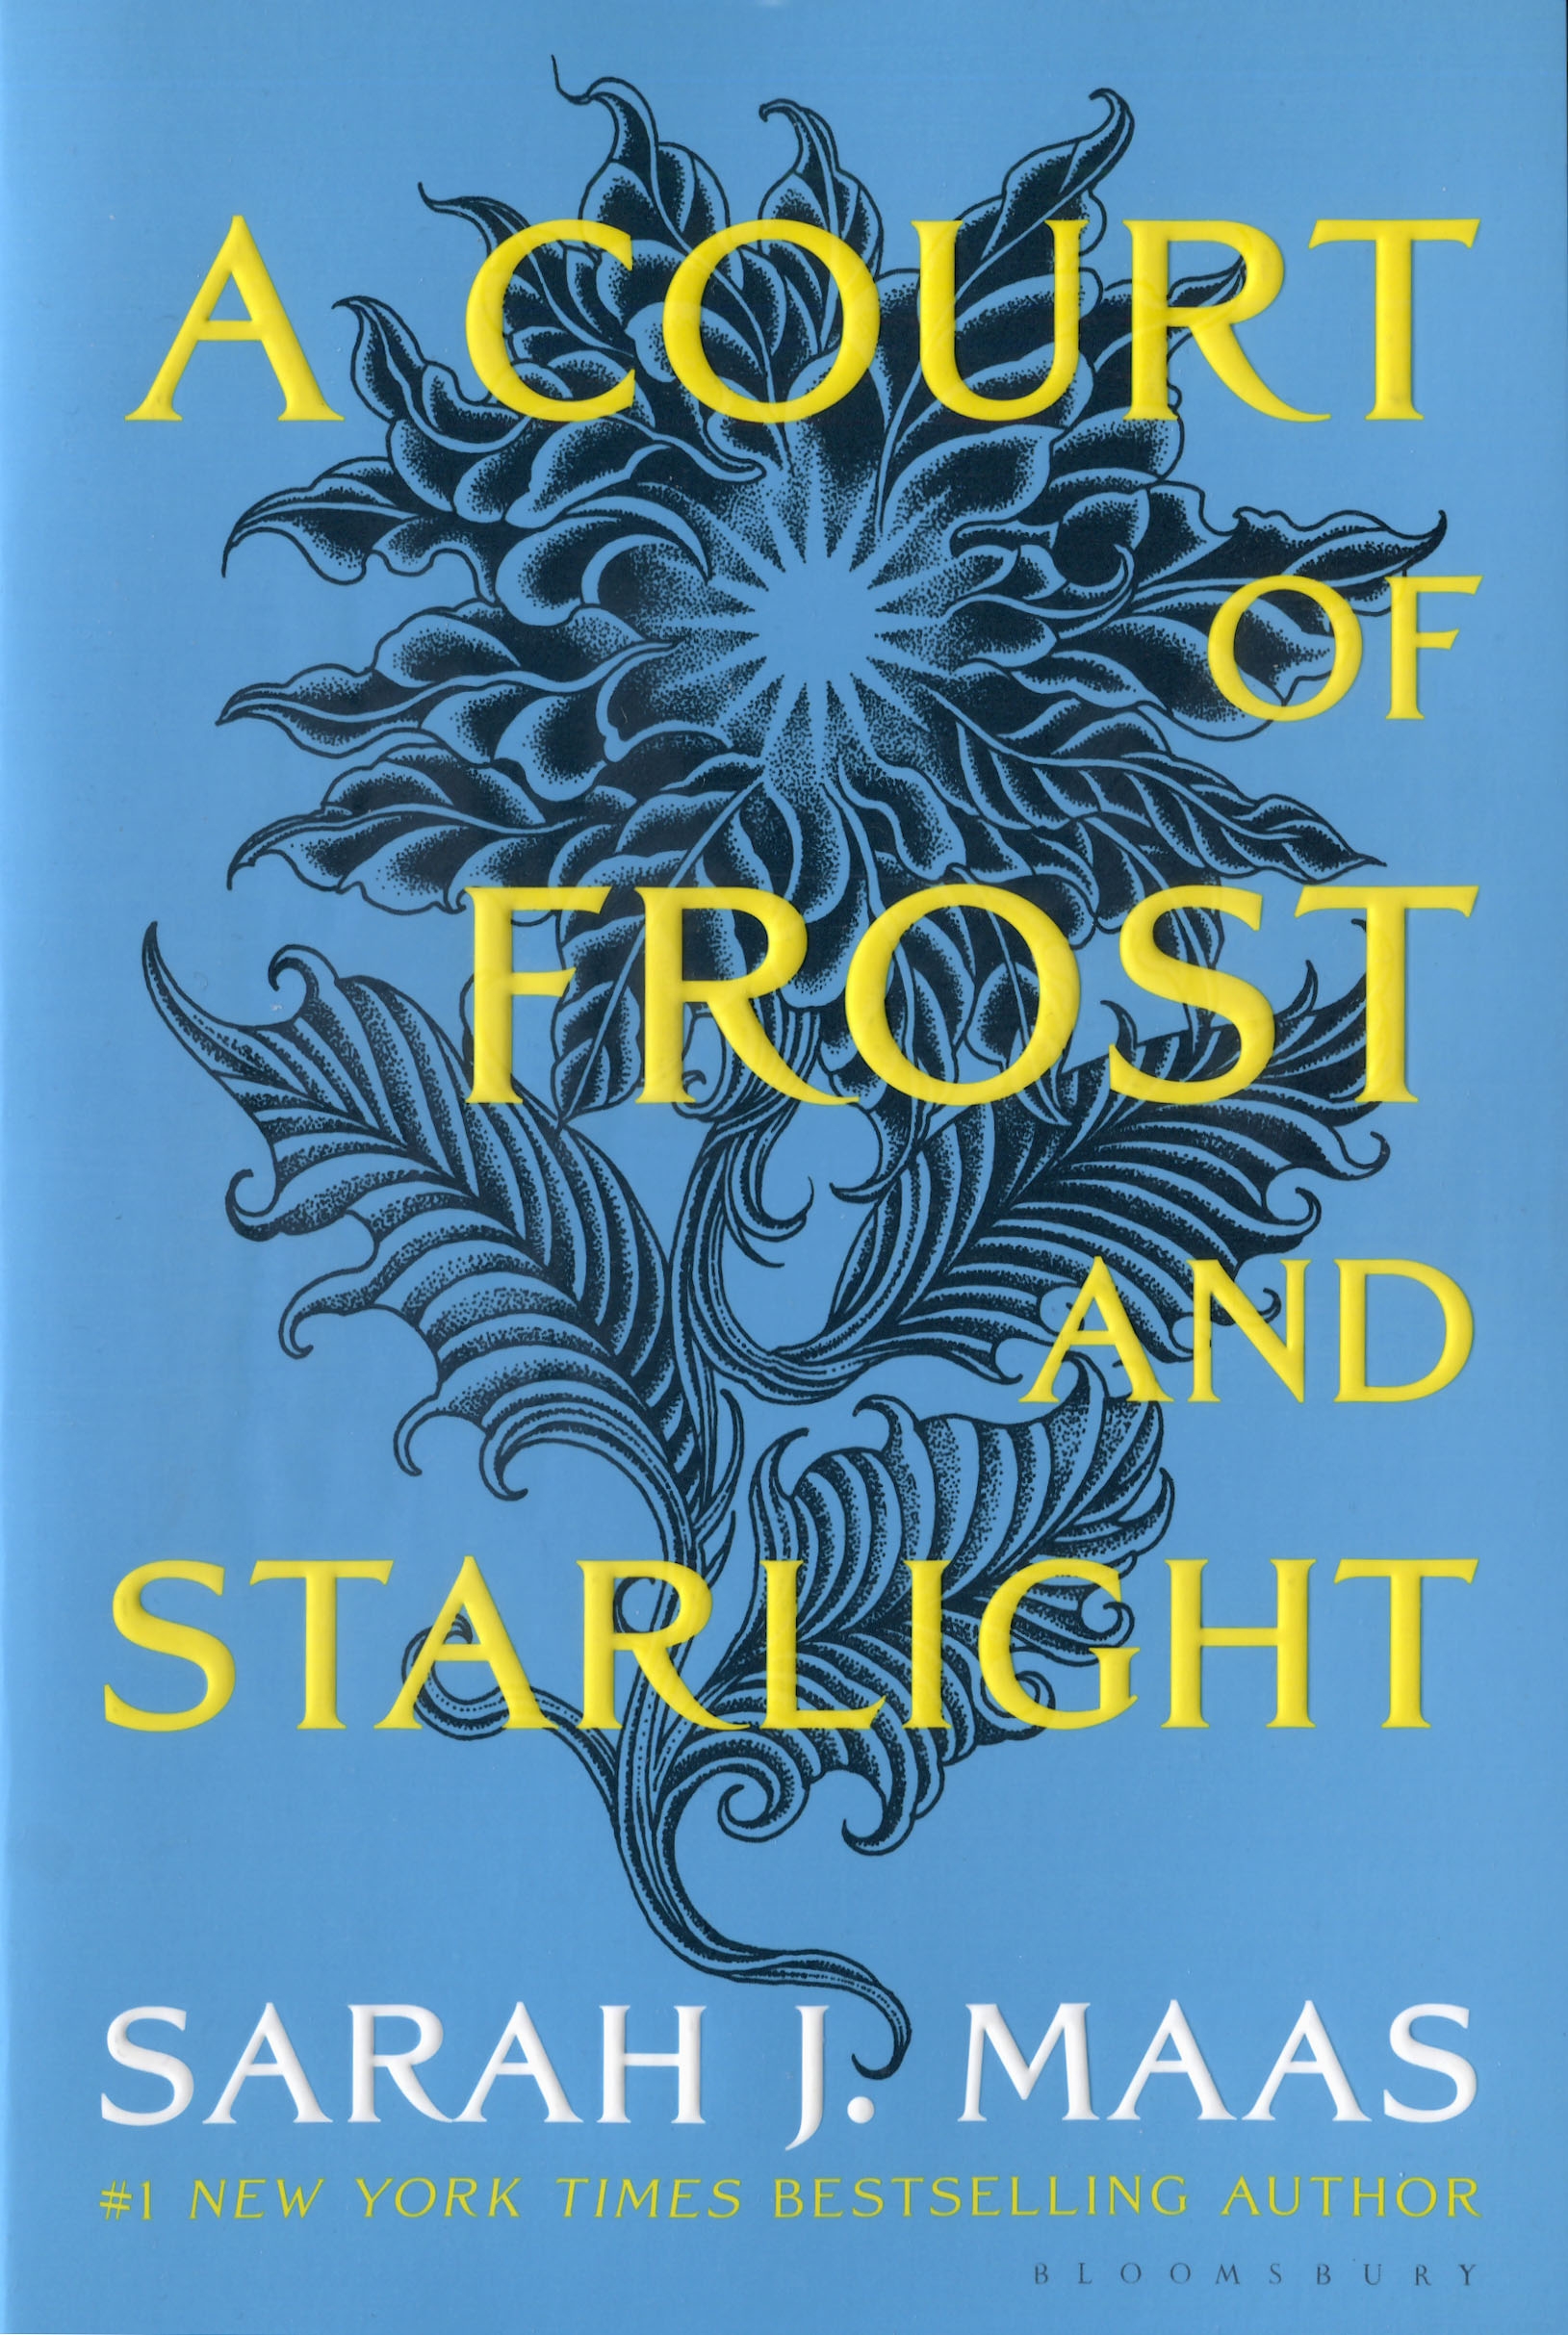 Imagen de portada para A Court of Frost and Starlight [electronic resource] : A Court of Thorns and Roses, Book 4